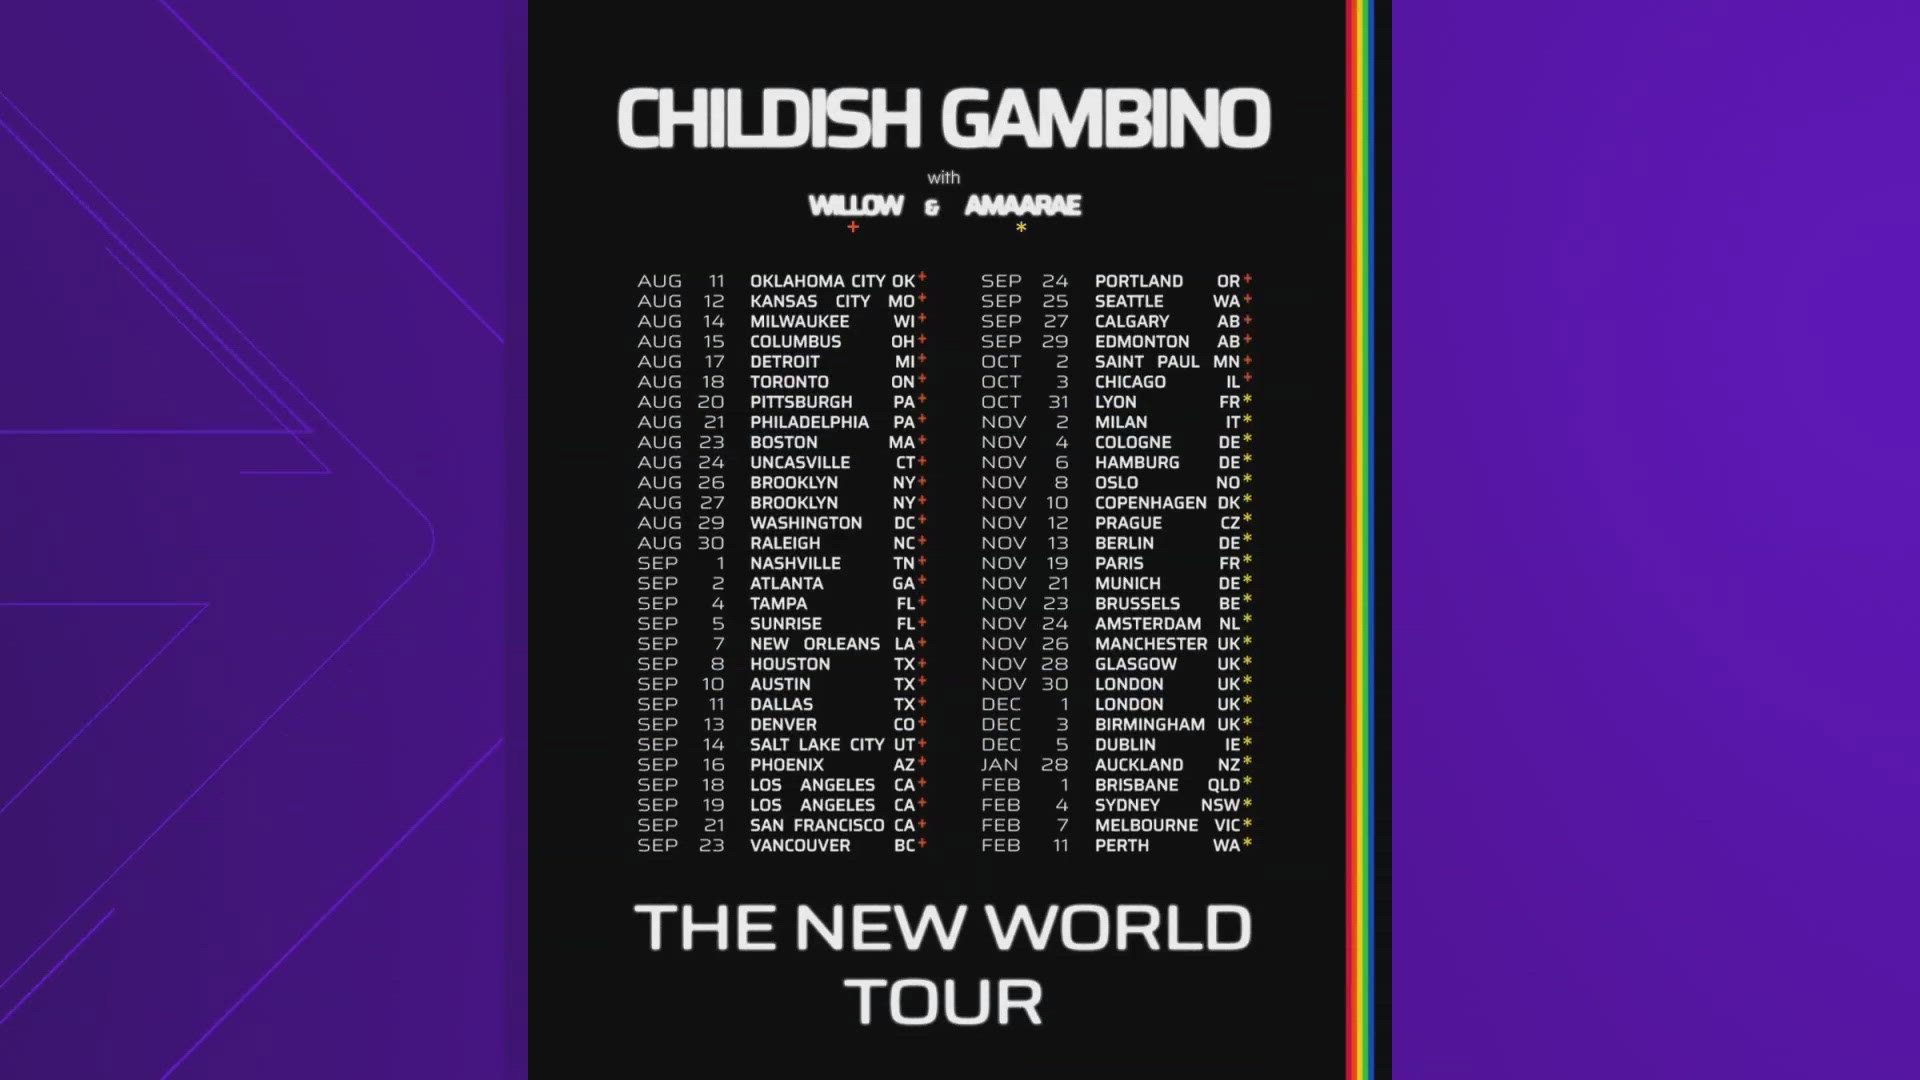 Donald Glover also known as 'Childish Gambino' on stage -- has announced his first world tour in five years.